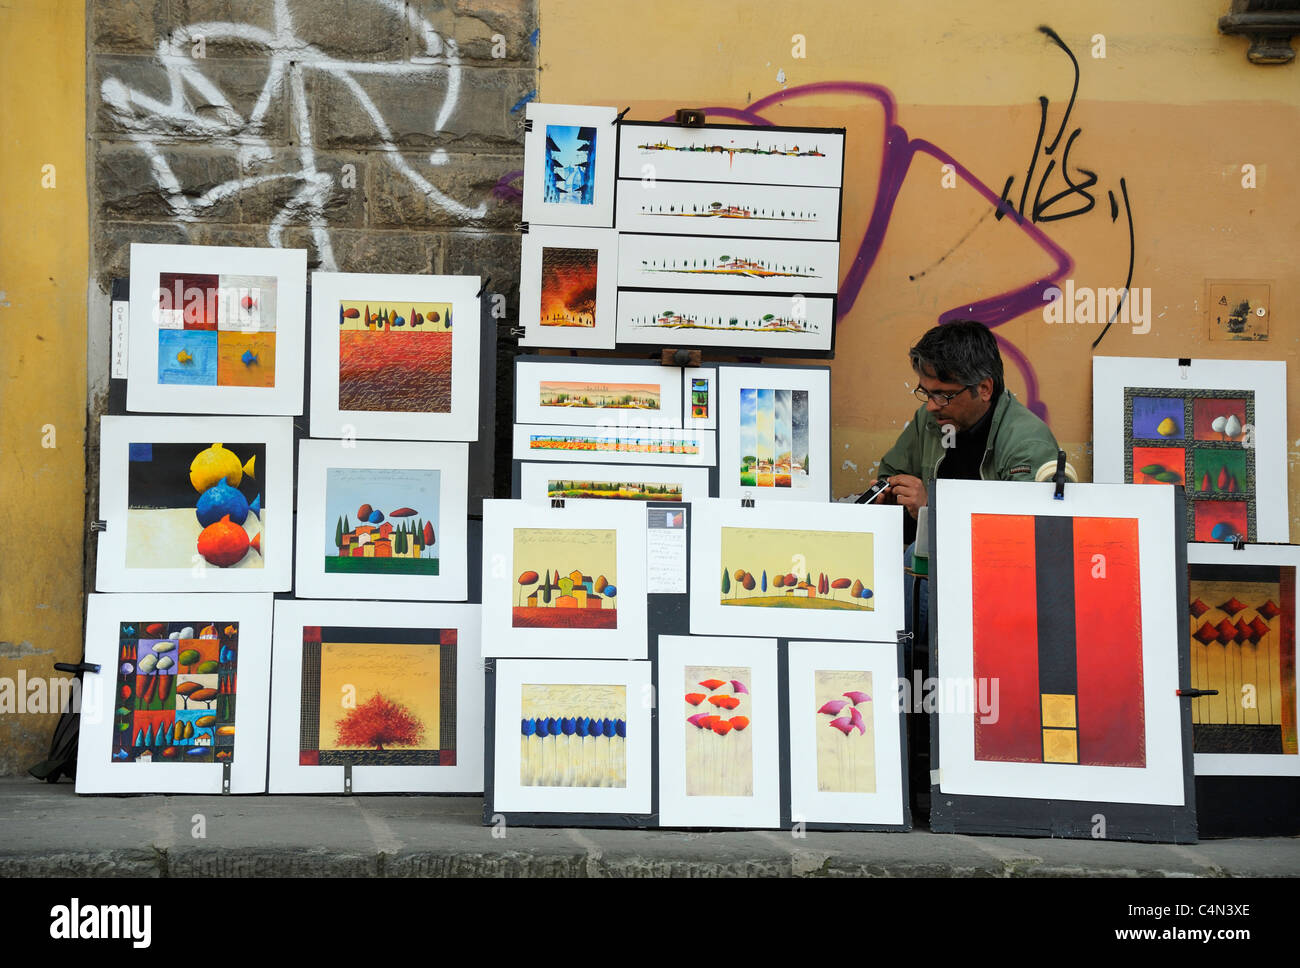 A Person selling Art Images, Roadside Shop Stock Photo